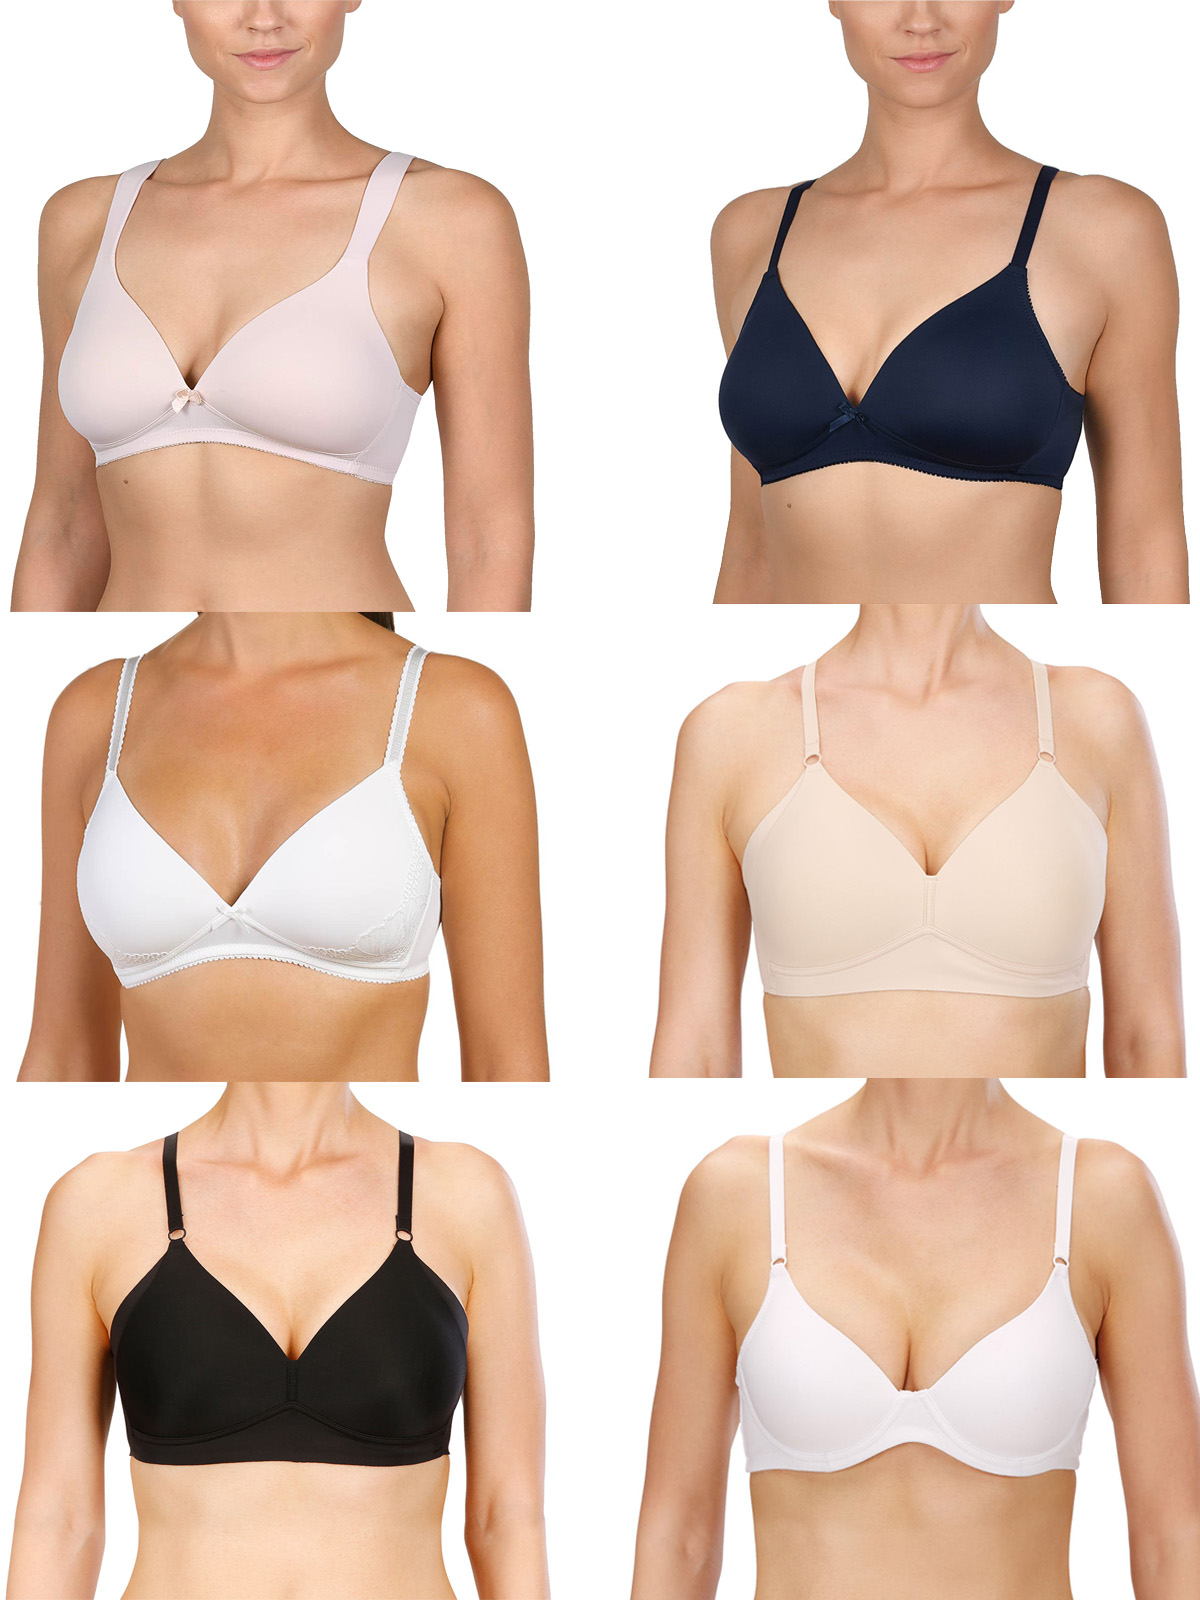 Naturana - - Naturana ASSORTED Soft Cup Non-Wired Bras - Size 34